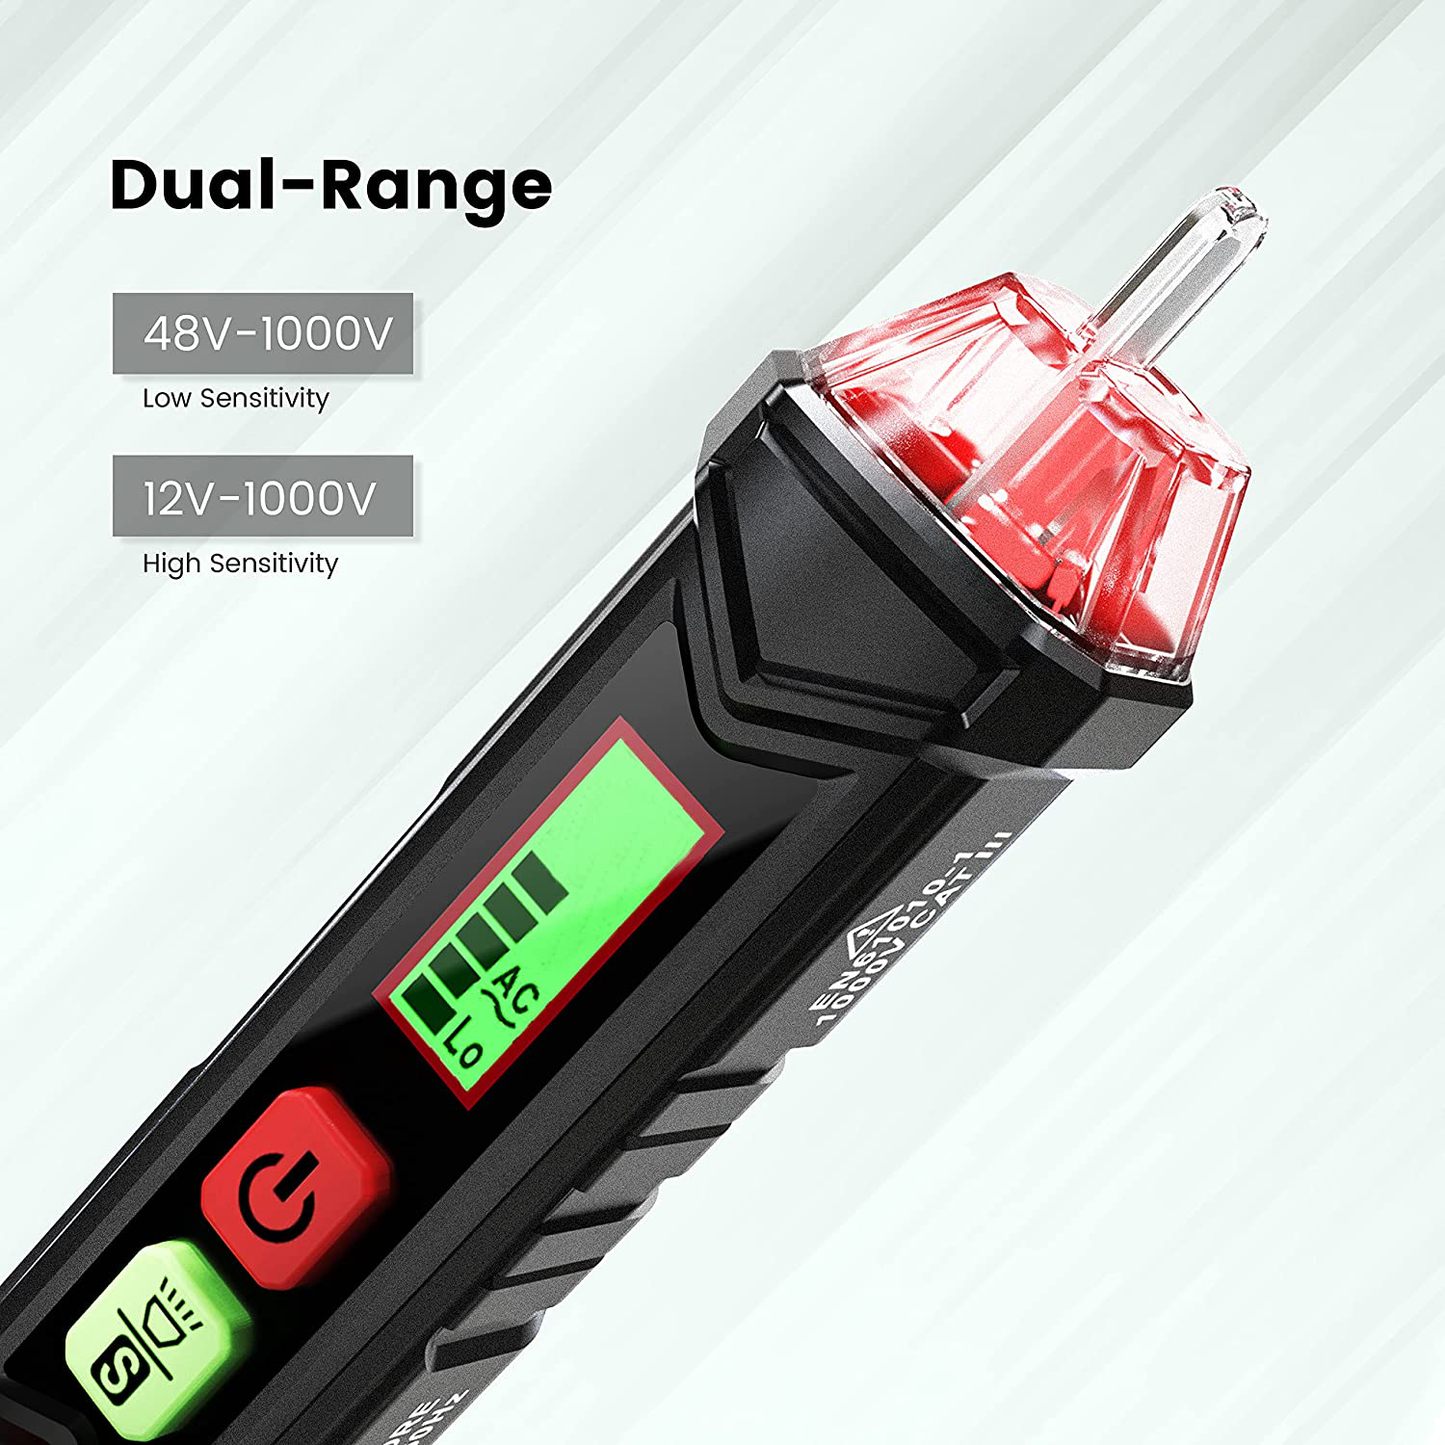 KAIWEETS Voltage Tester/Non-Contact Voltage Tester with Dual Range AC 12V-1000V/48V-1000V, Live/Null Wire Tester, Electrical Tester with LCD Display, Buzzer Alarm, Wire Breakpoint Finder-HT100